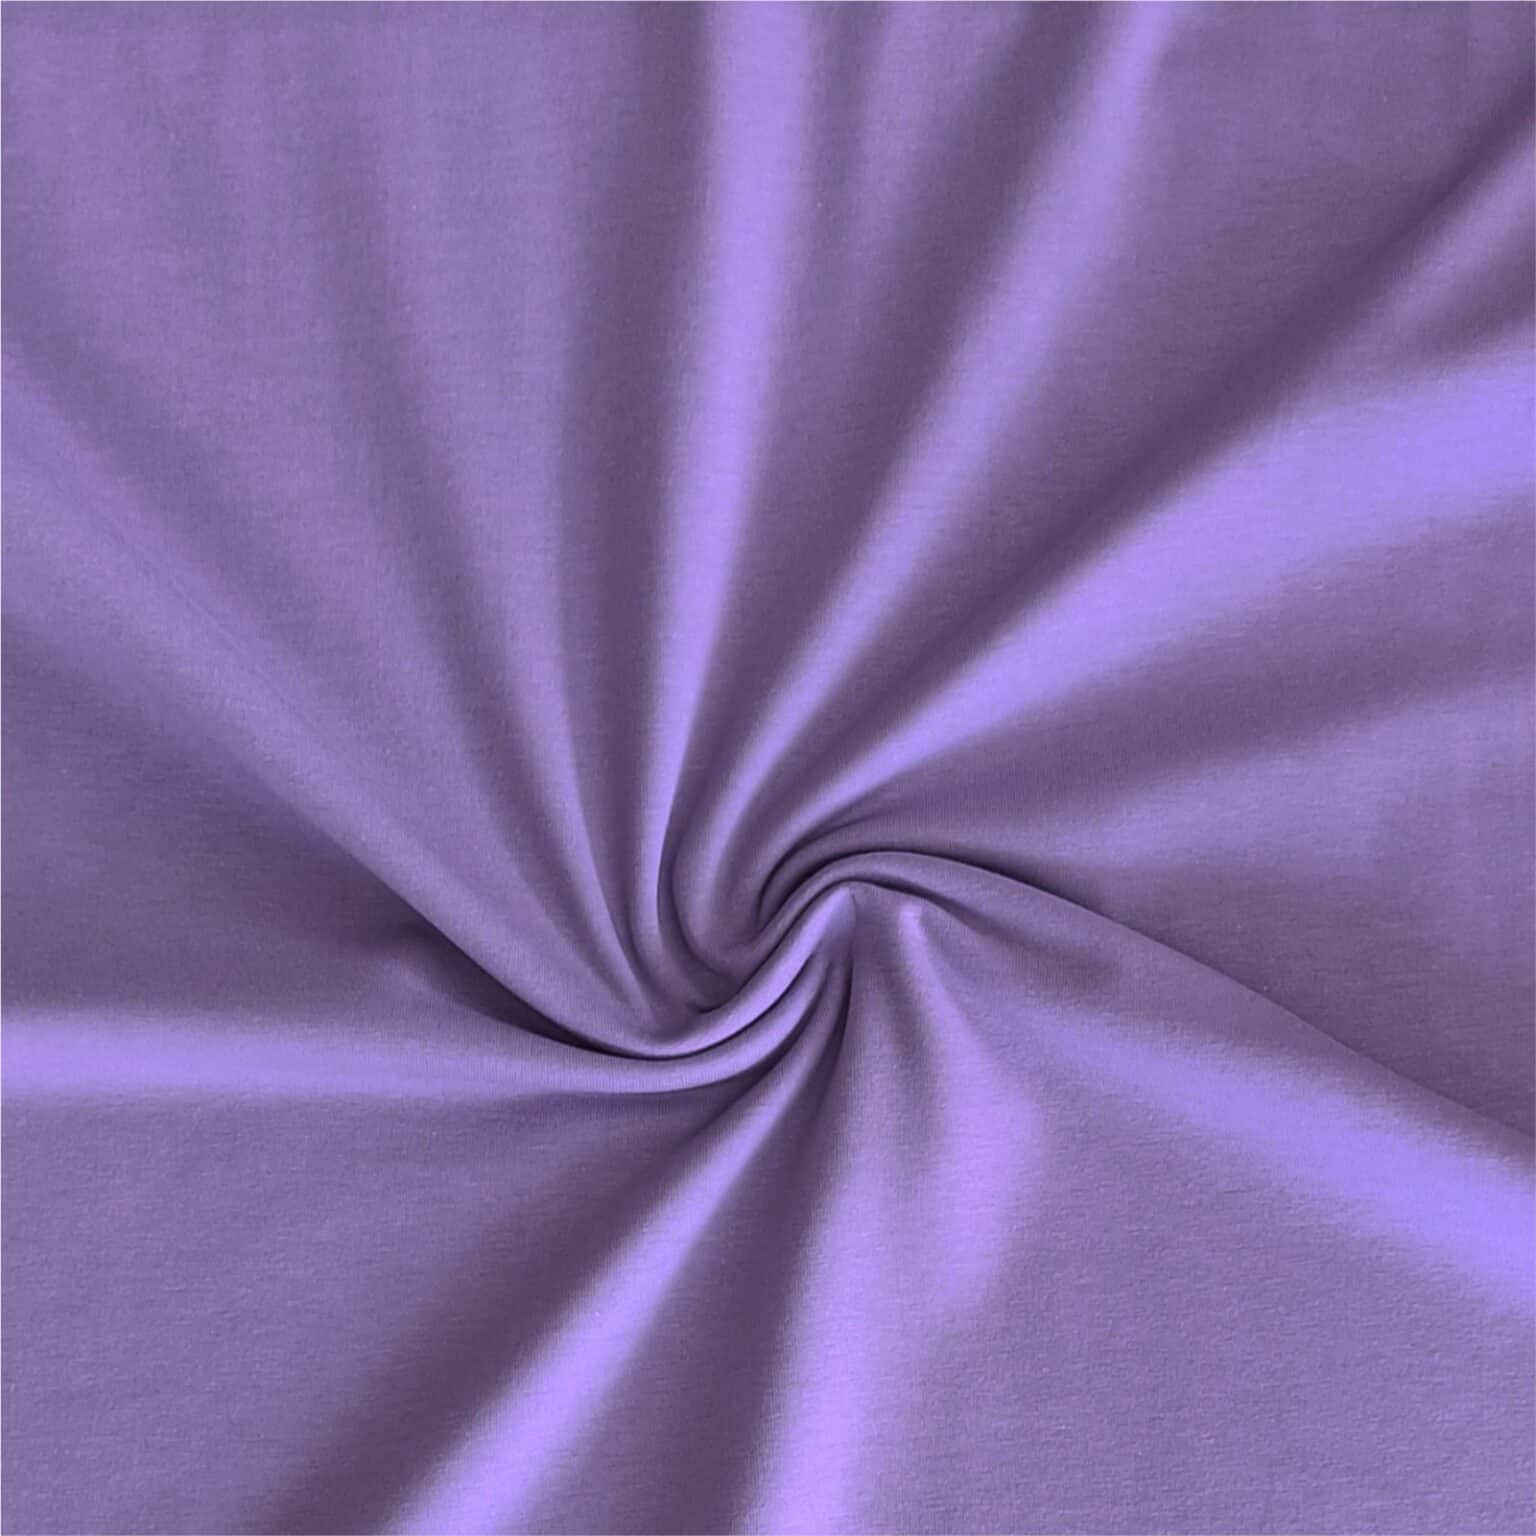 lilac plain cotton jersey fabric | More Sewing